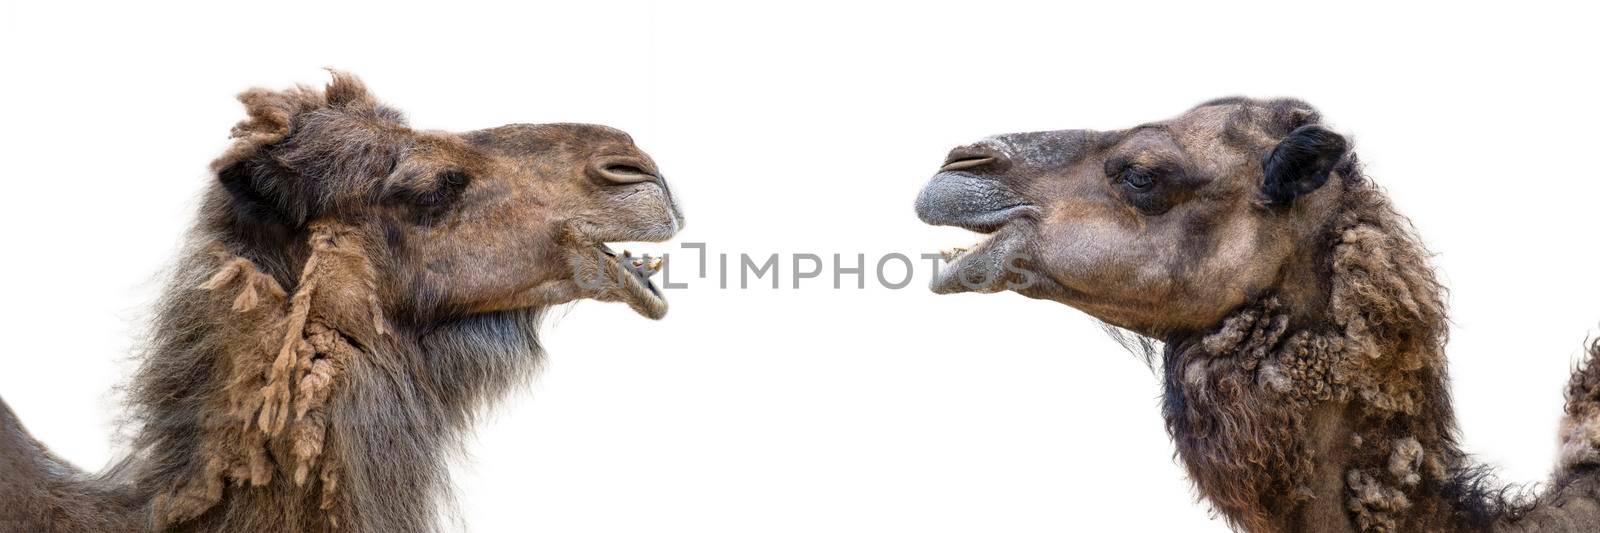 Two smiling camels on a white background. Camel head close up, side view. The camel opened its mouth and showed its teeth by SERSOL